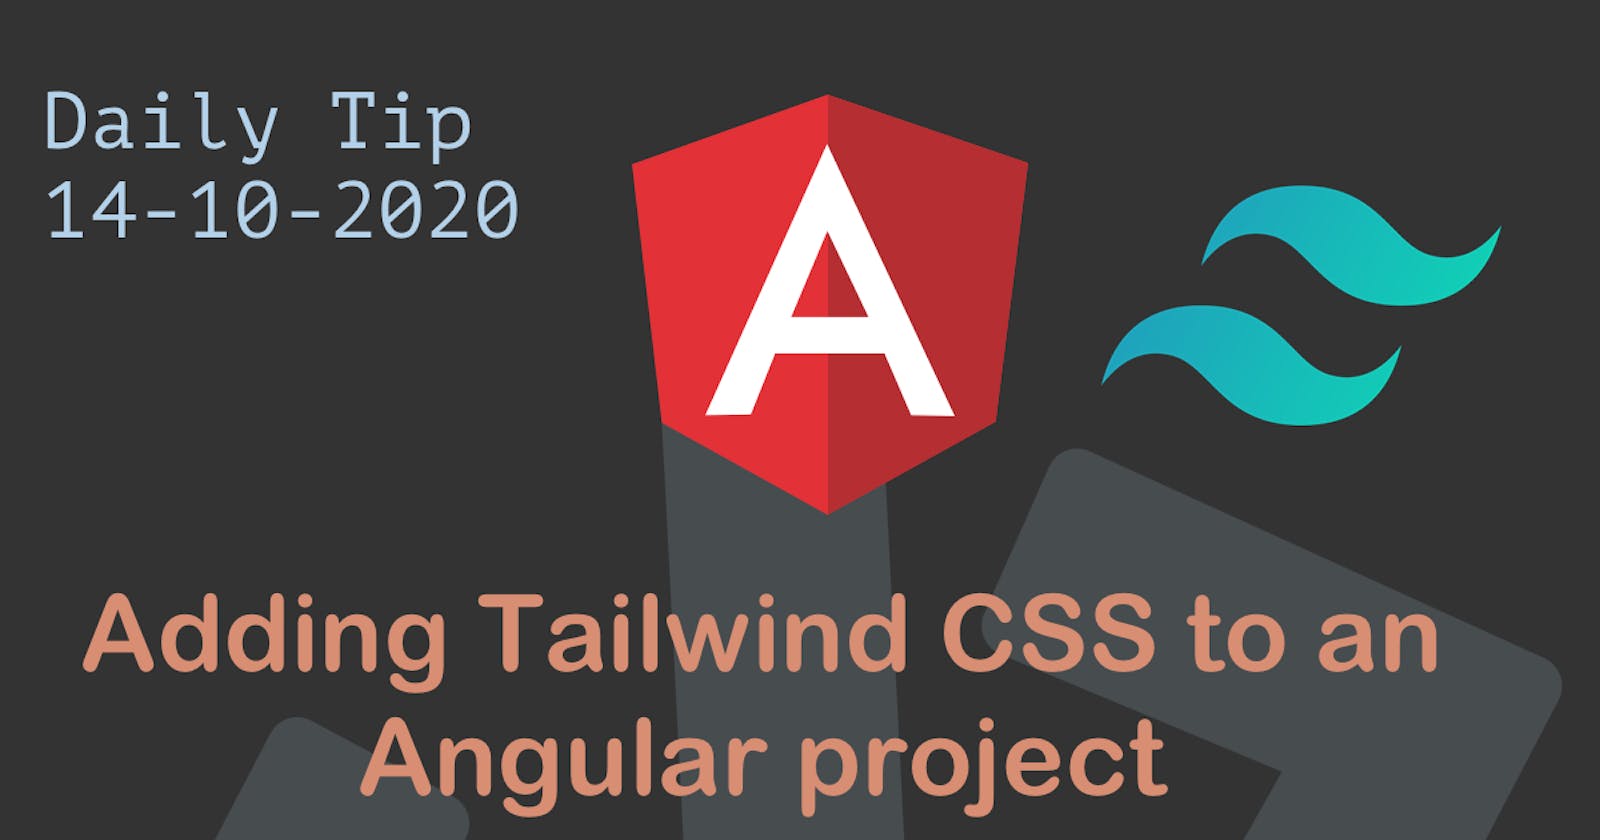 Adding Tailwind CSS to an Angular project